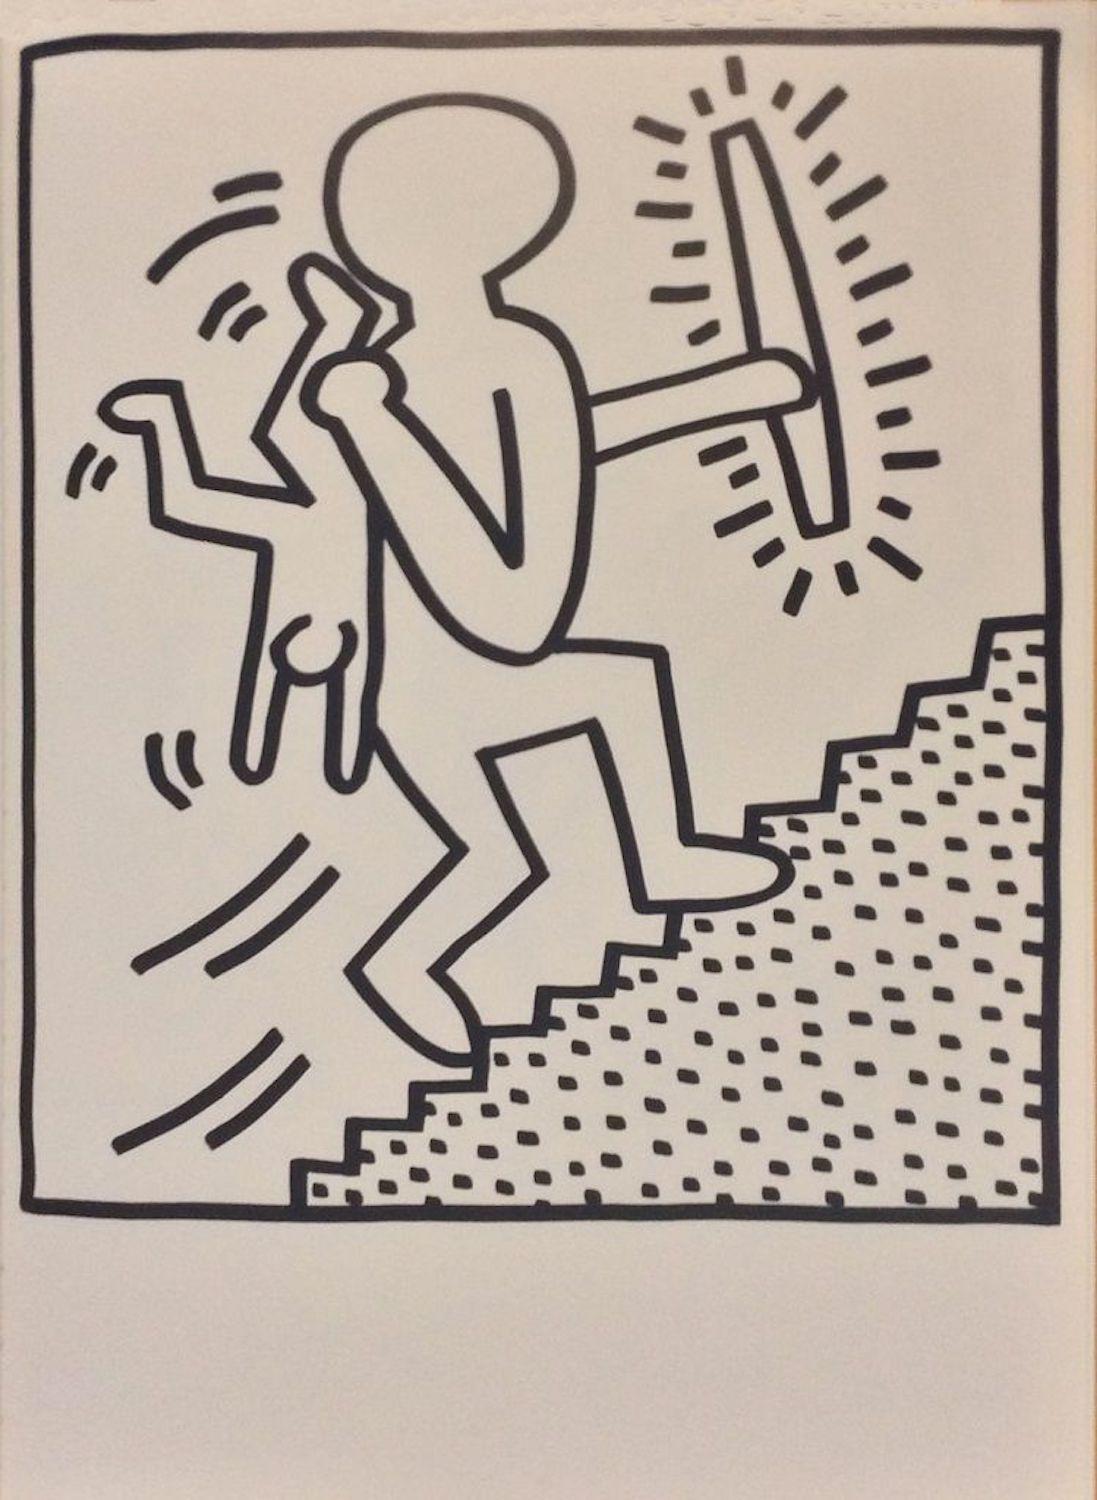 (after) Keith Haring Print - Lithograph from the "Keith Haring-Lucio Amelio" artist's book, 1983